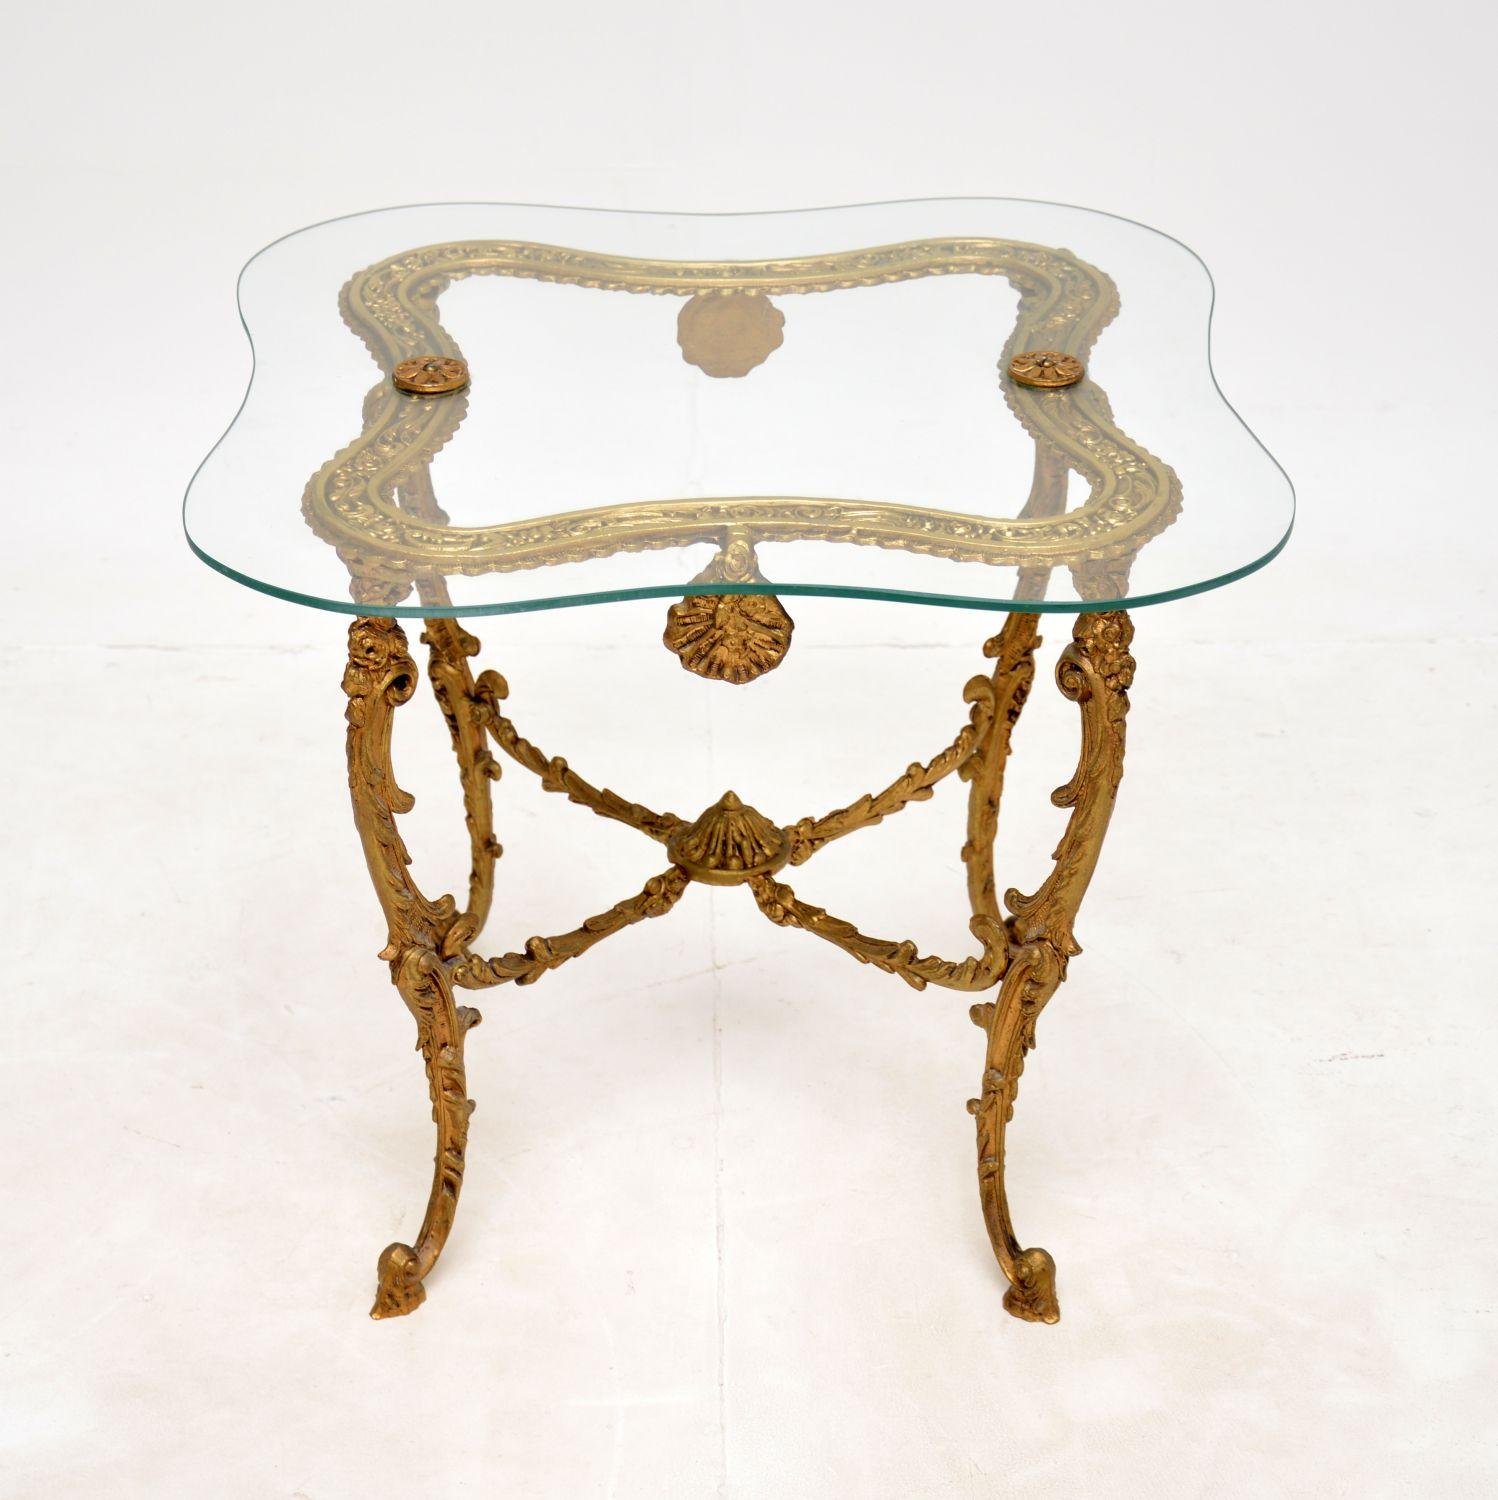 A stunning antique French low table with a brass frame and fixed glass top. This was made in France, it dates from around the 1930’s period.

It is of excellent quality and is beautifully designed. It is a perfect size to be used as a coffee table